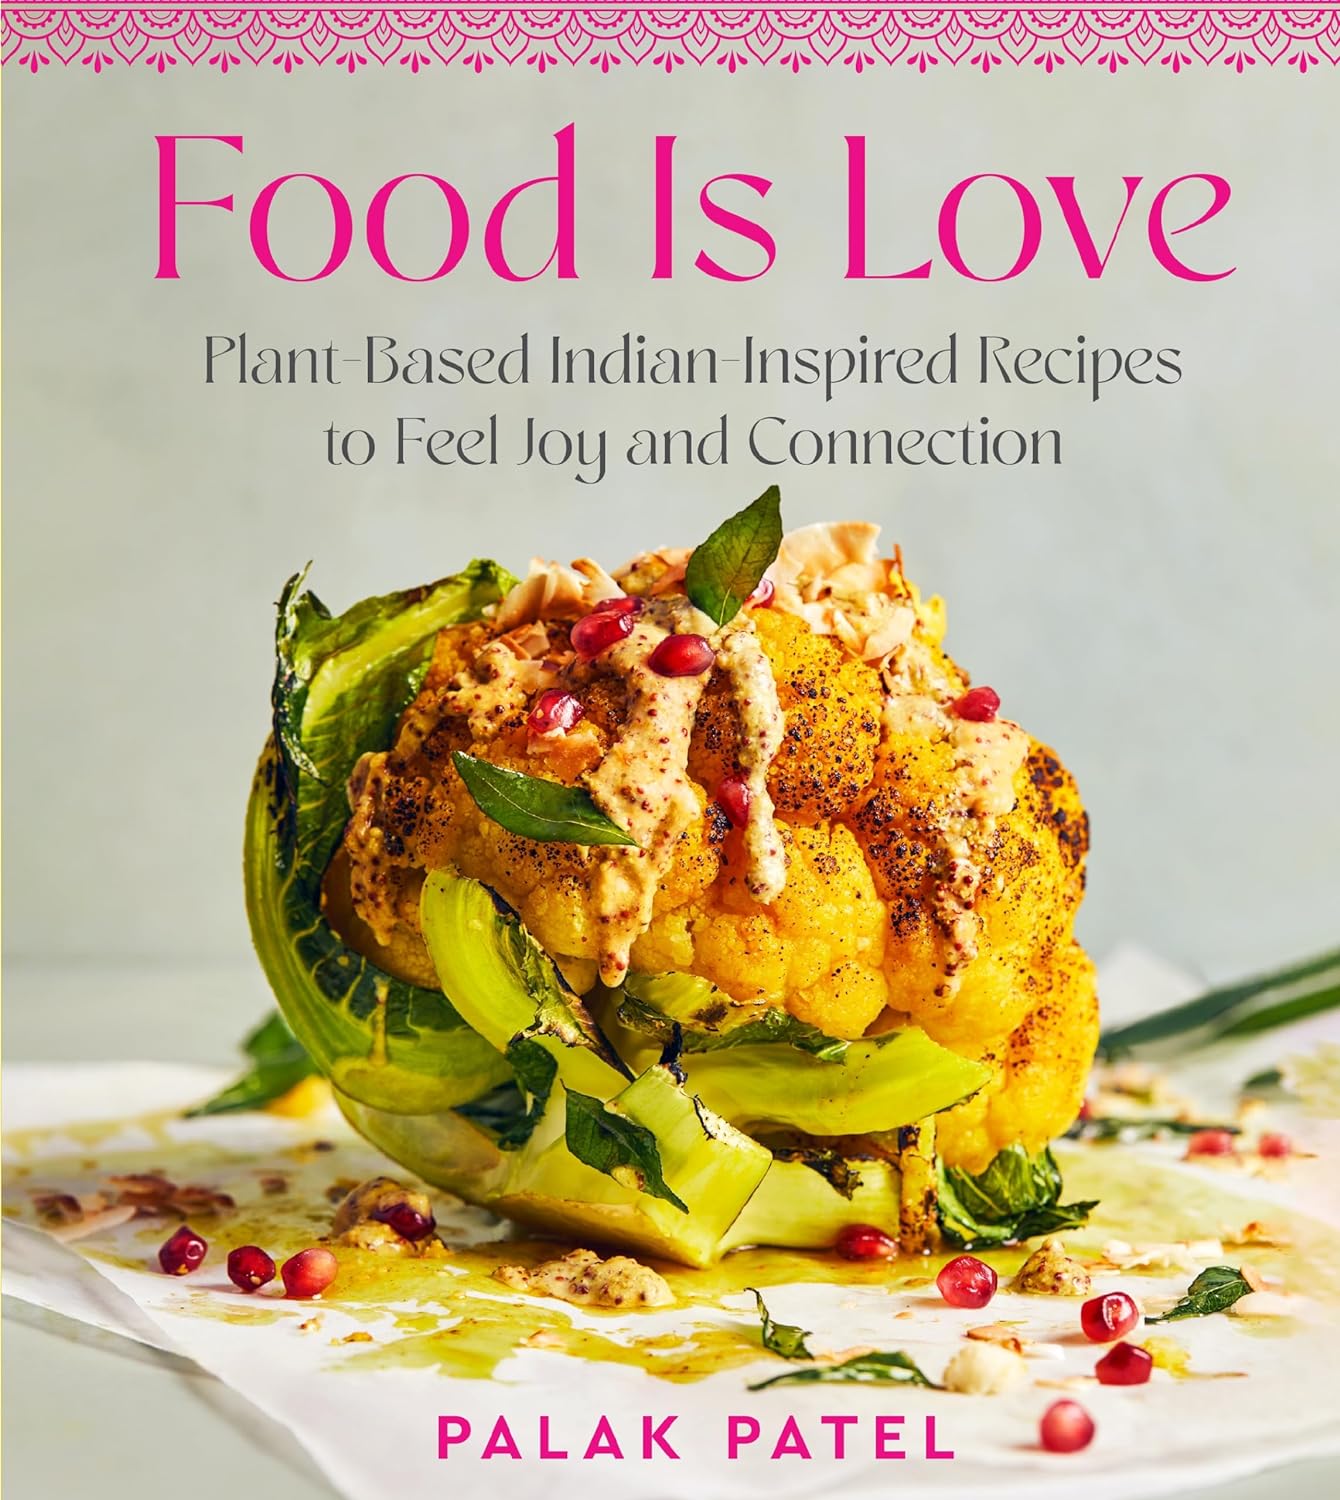 Food Is Love: Plant-Based Indian-Inspired Recipes to Feel Joy and Connection (Palak Patel)